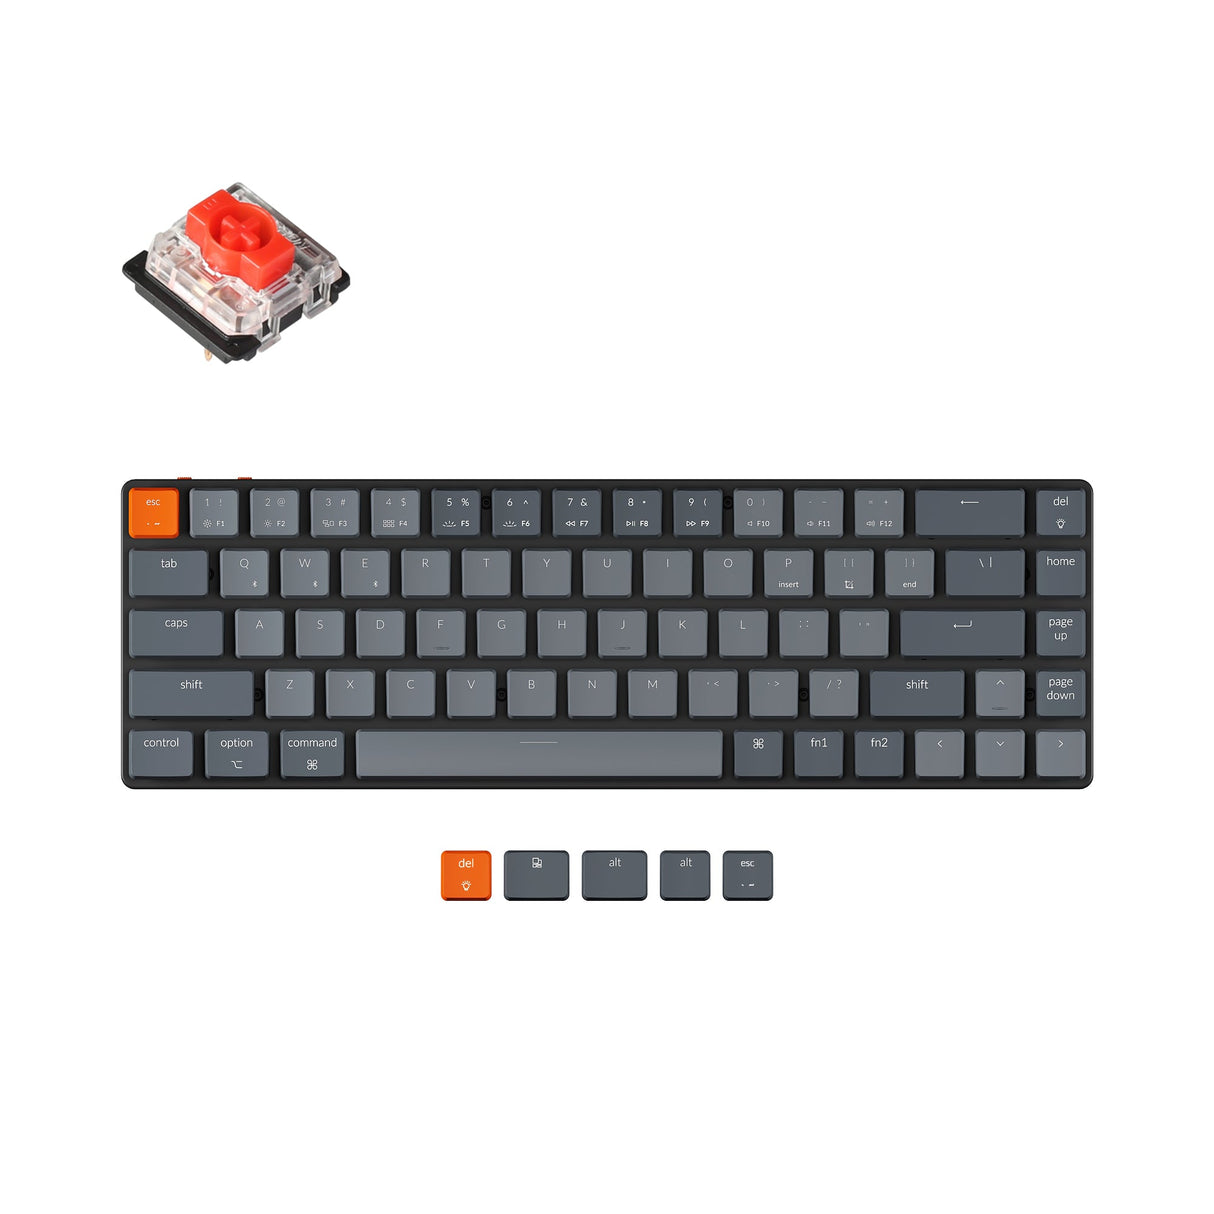 Keychron K7 65-percent ultra-slim compact wireless mechanical keyboard for Mac Windows Hot-swappable low-profile Gateron Mechanical red switches with White backlit